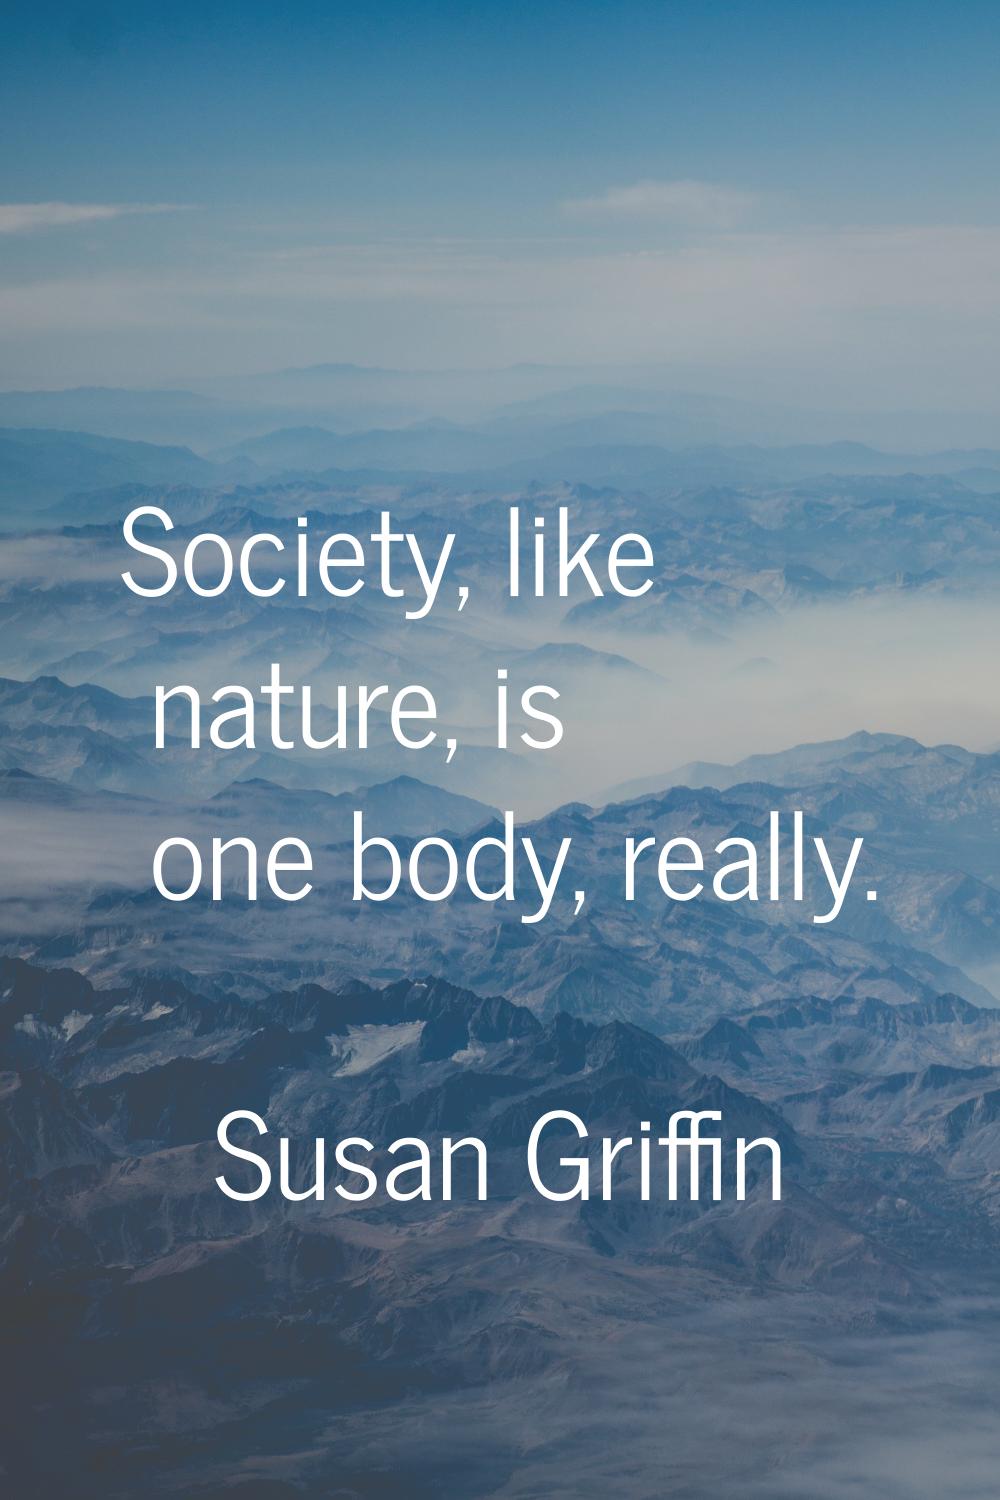 Society, like nature, is one body, really.